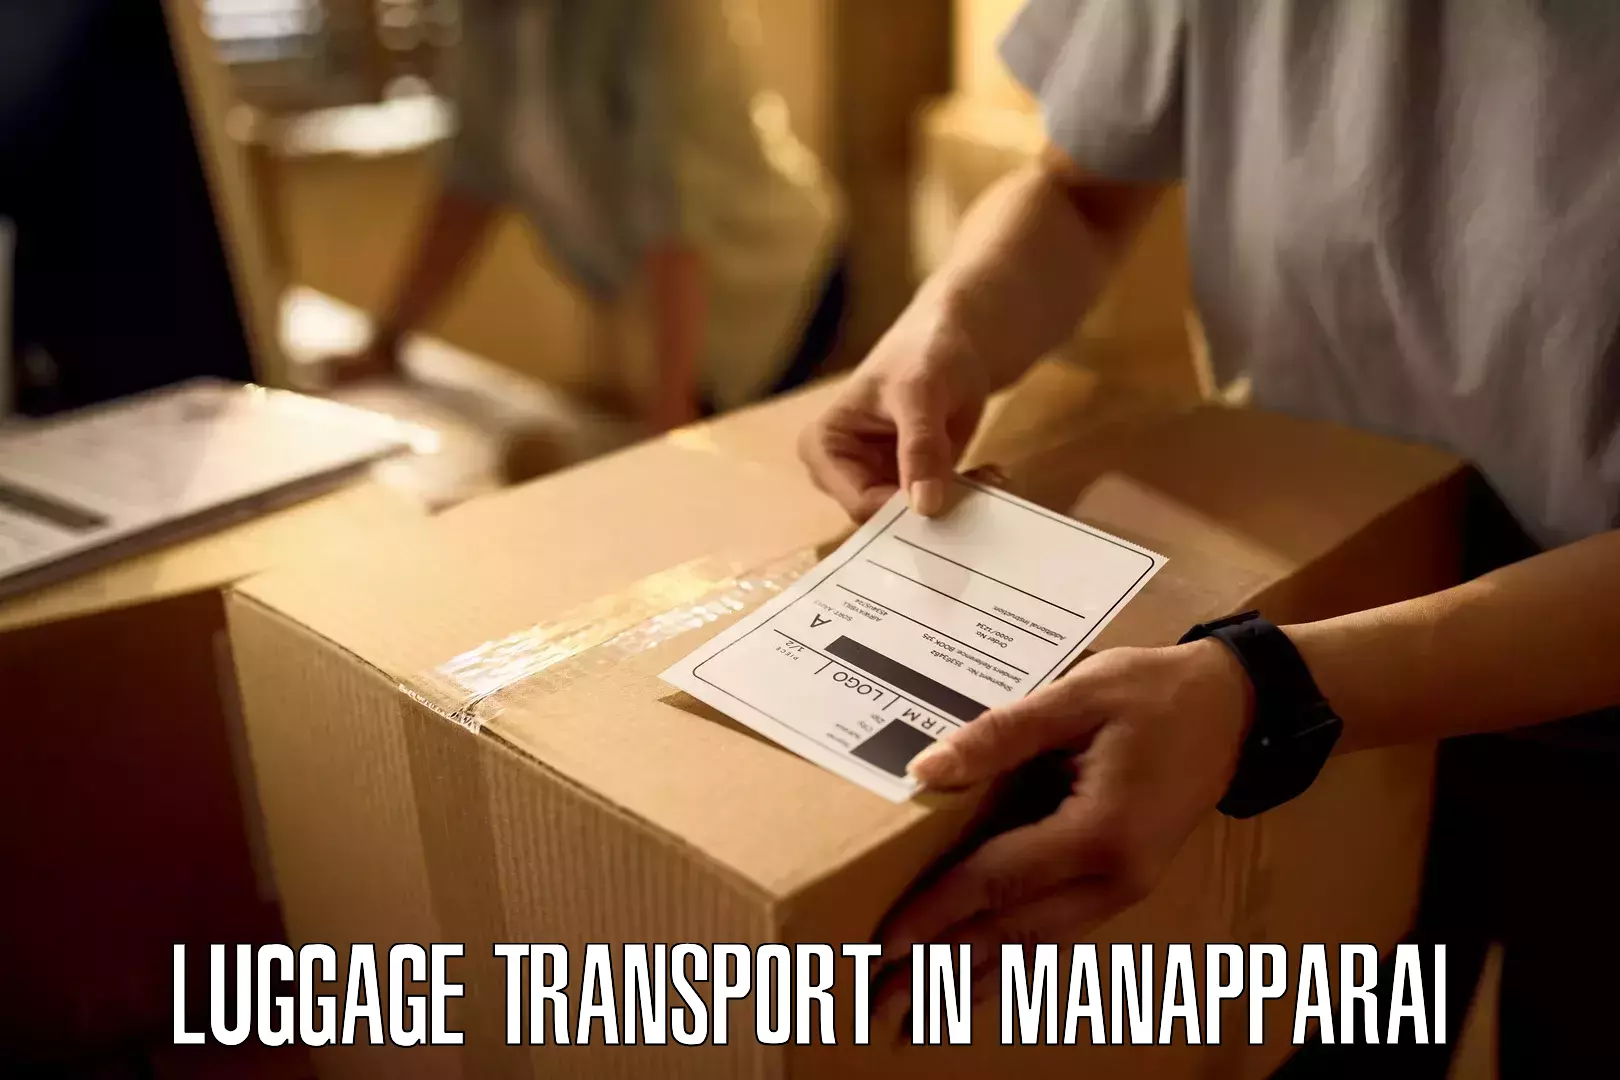 Instant baggage transport quote in Manapparai